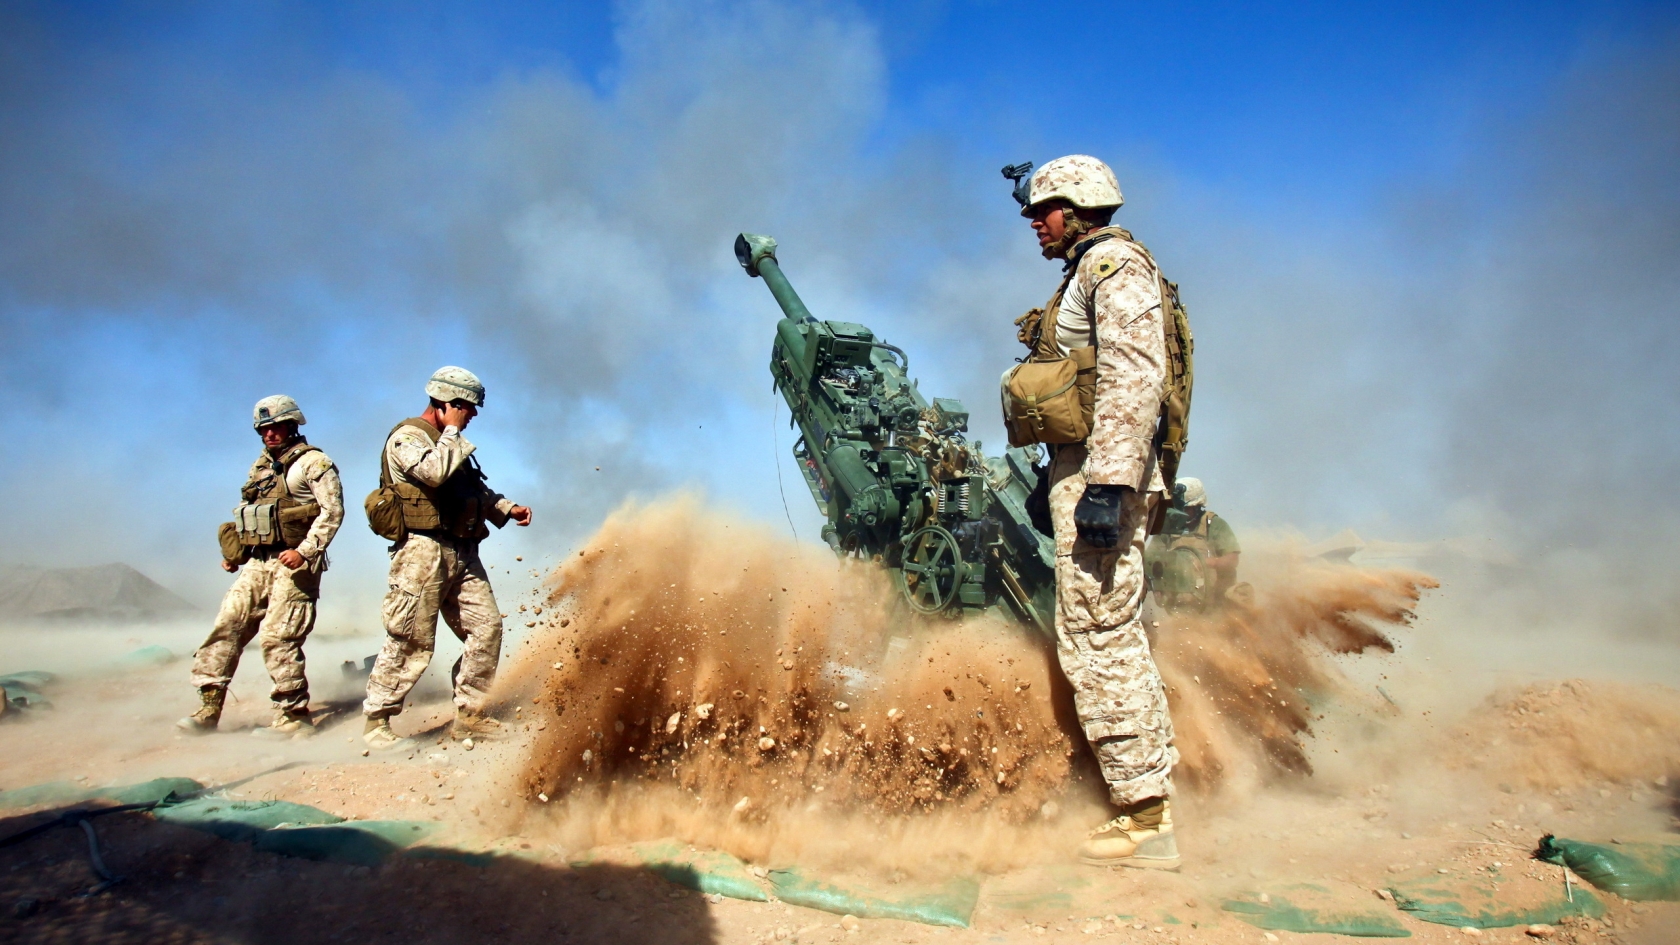 Howitzer and Soldiers for 1680 x 945 HDTV resolution